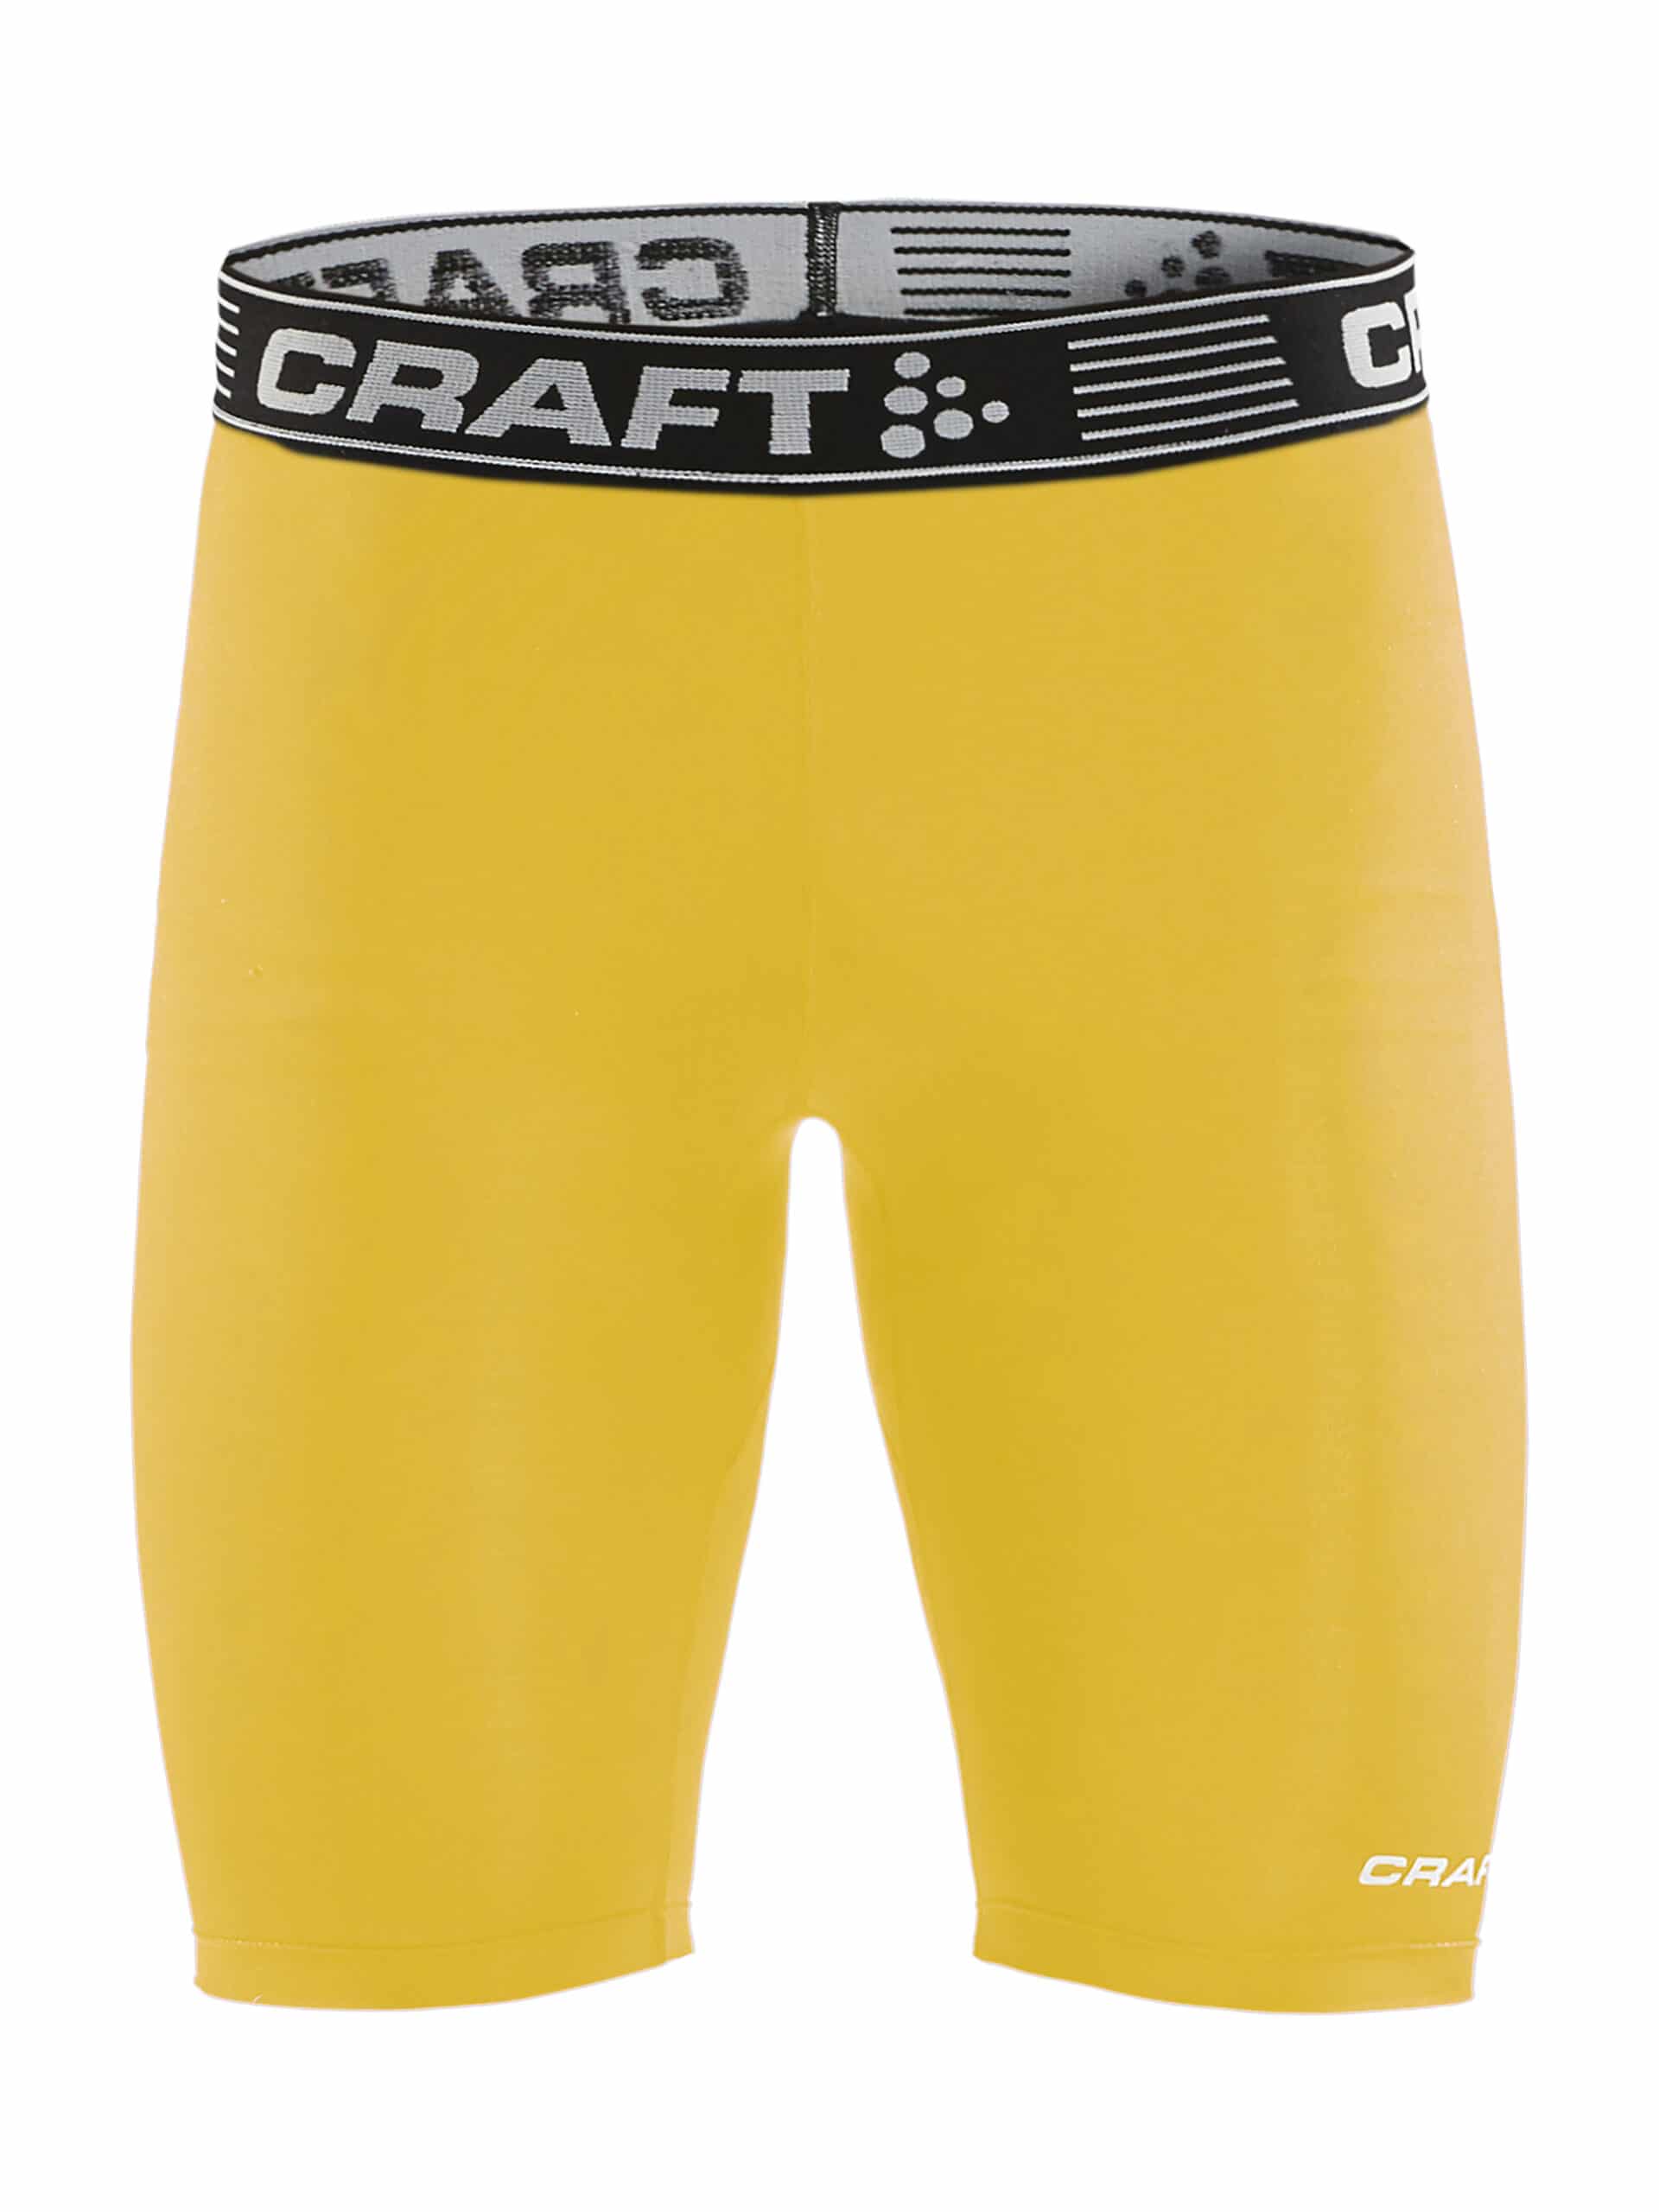 Craft - Pro Control Compression Short Tights Uni - Sweden Yellow S